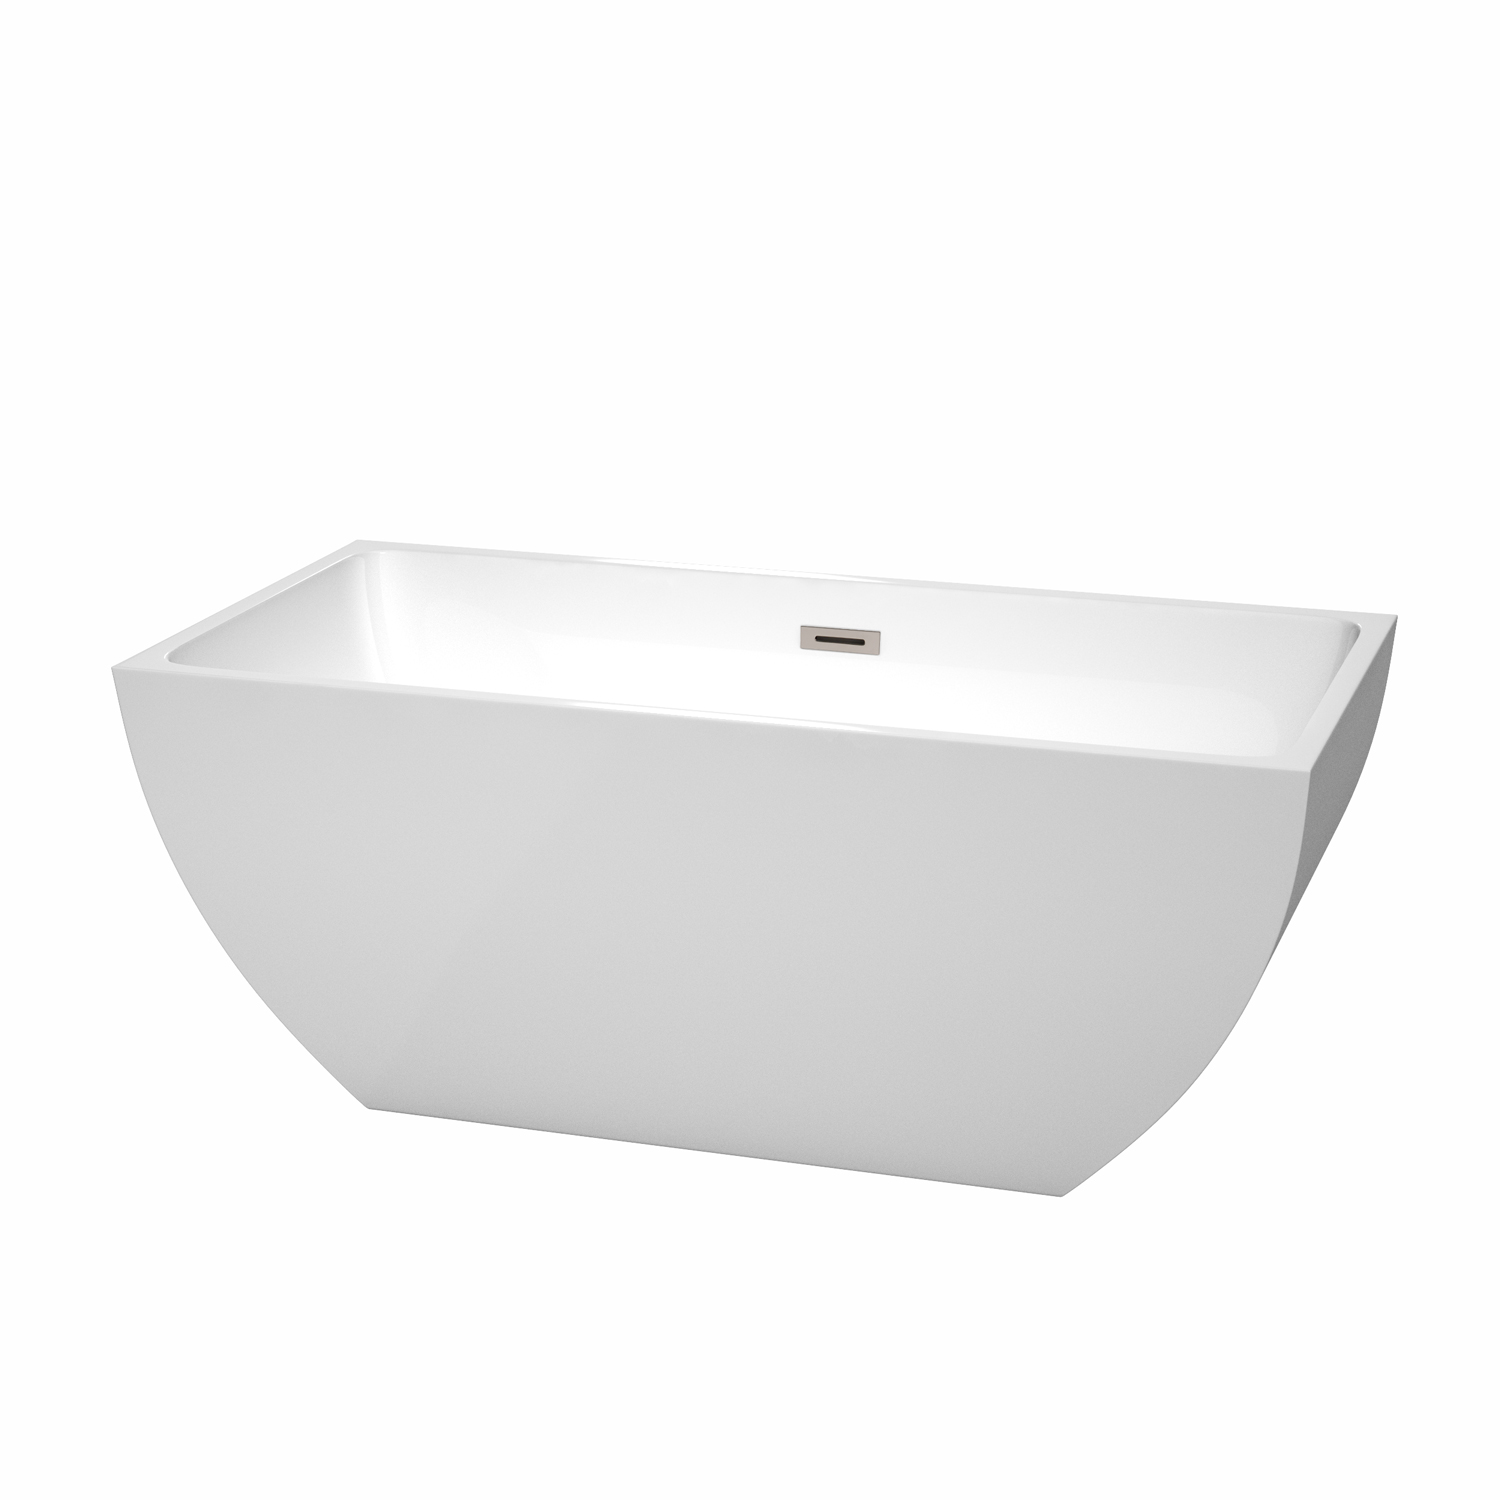 59" Freestanding Bathtub in White with Brushed Nickel Drain and Overflow Trim with Faucet Options